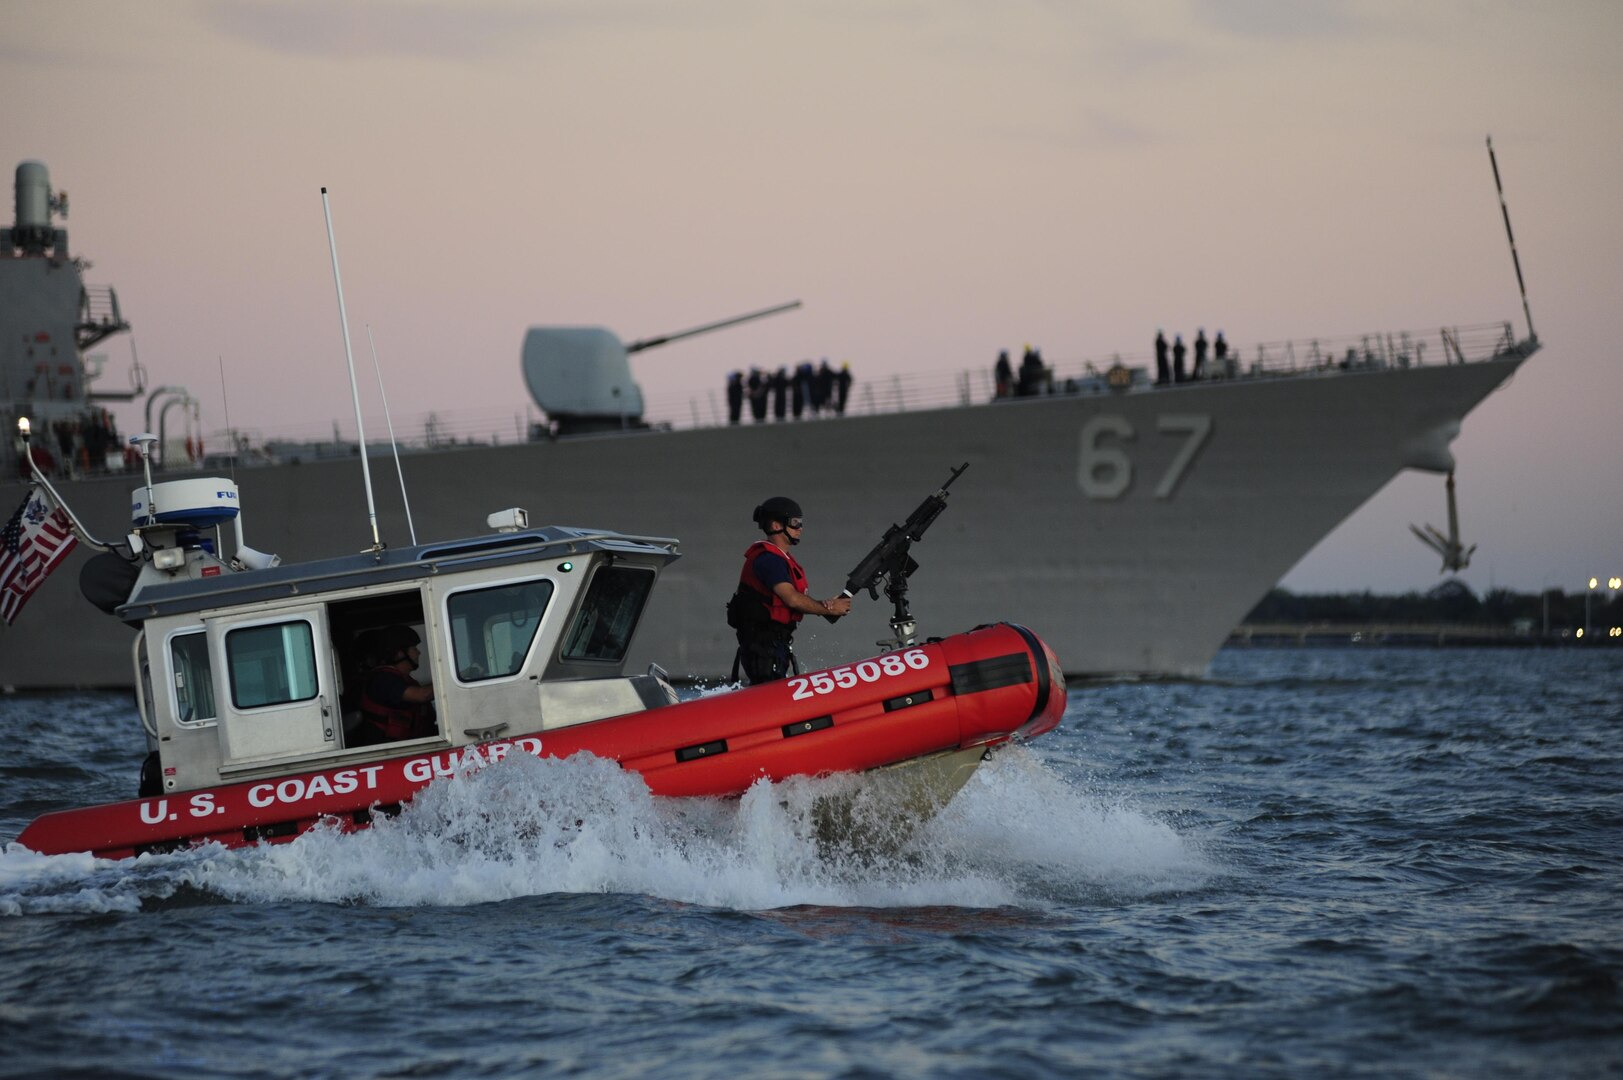 A Coast Guard Maritime Safety and Security Team crew, temporarily deployed from San Francisco, provides an escort for the USS Cole as the Navy destroyer returns to the Norfolk Naval Shipyard. Coast Guard crews worked to provide security zones for the Navy ships returning to harbor after Hurricane Irene. (U.S Coast Guard Photo by Petty Officer 3rd Class David Weydert)